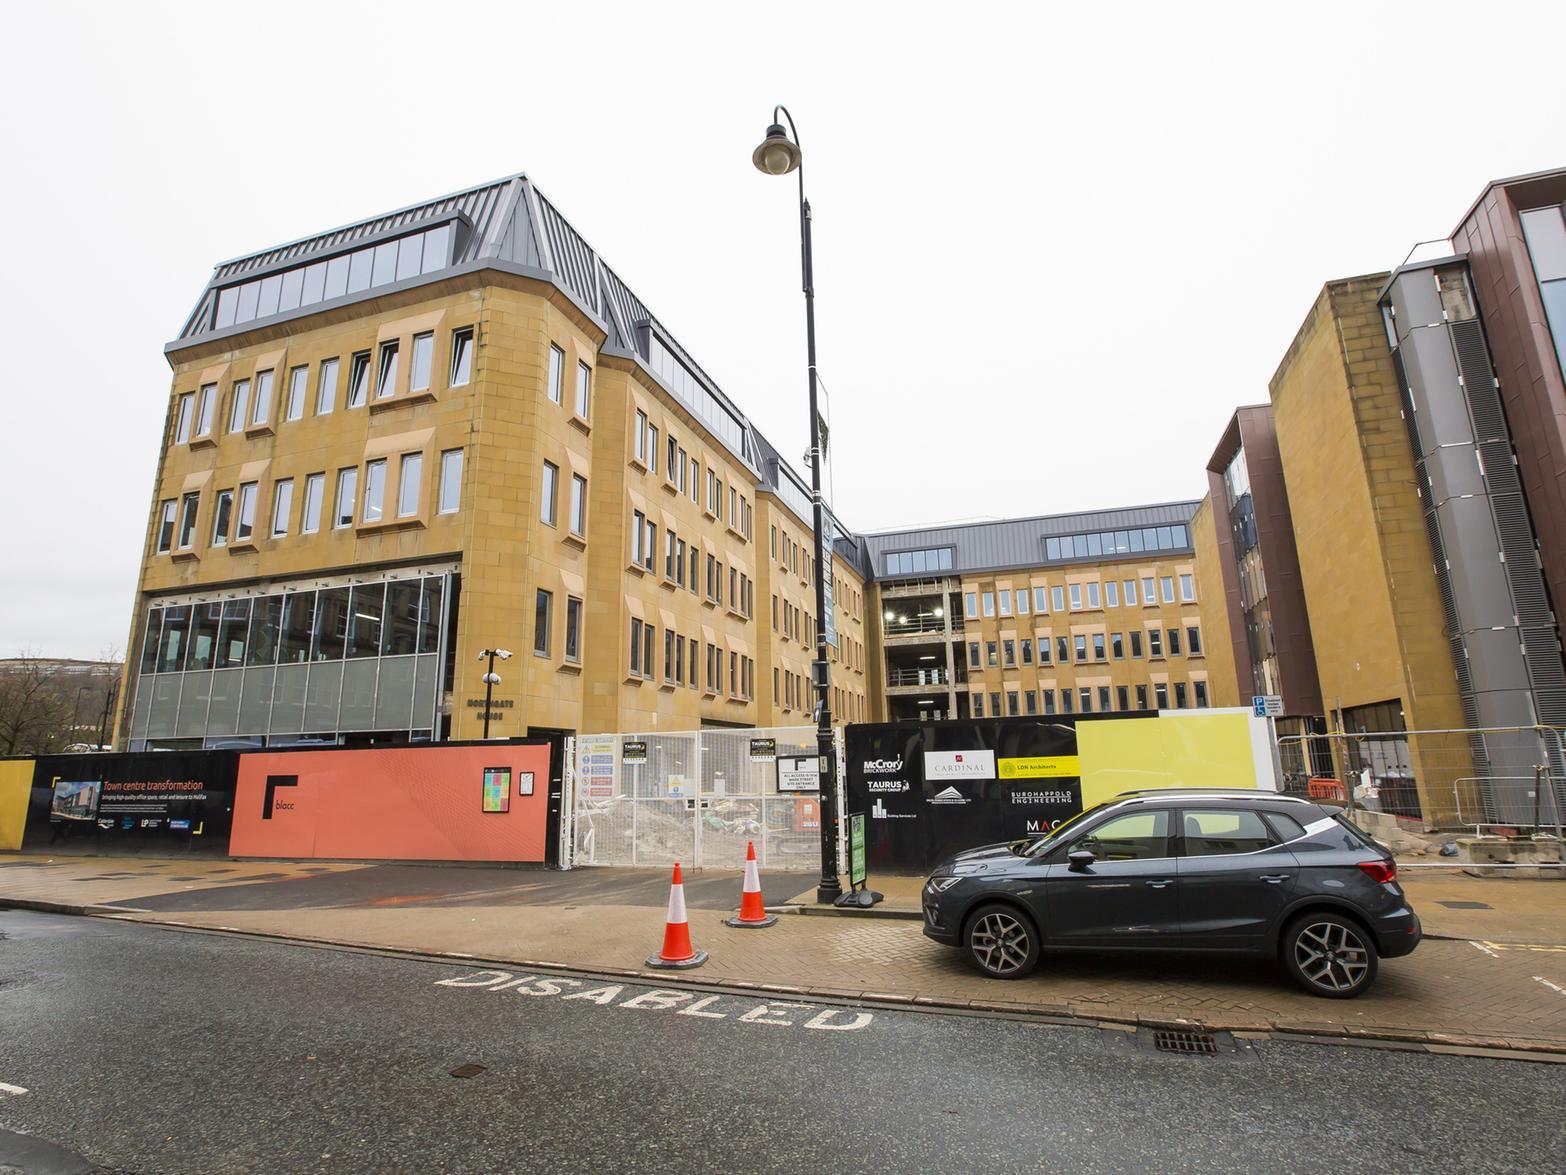 The work on the old Northgate House side of the development is being part funded by the West Yorkshire Combined Authority through the Leeds City Region Local Enterprise Partnership (LEP) Growth Deal